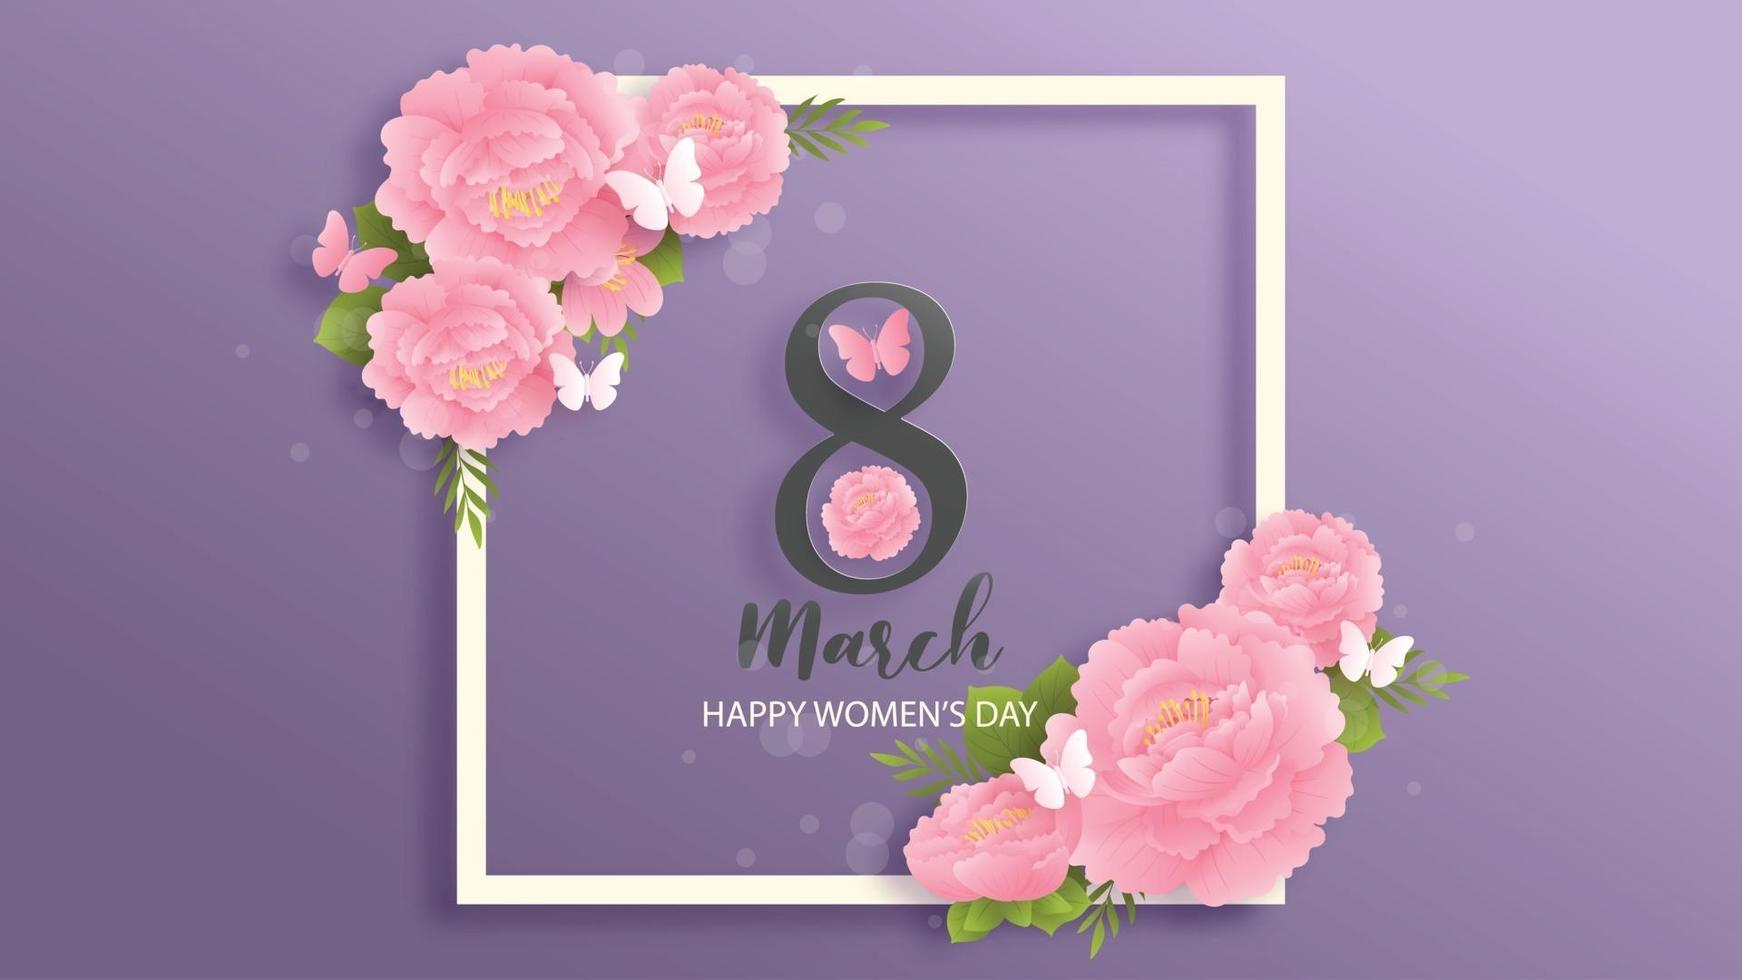 8 March, Happy women's day for card and background. Vector illustration